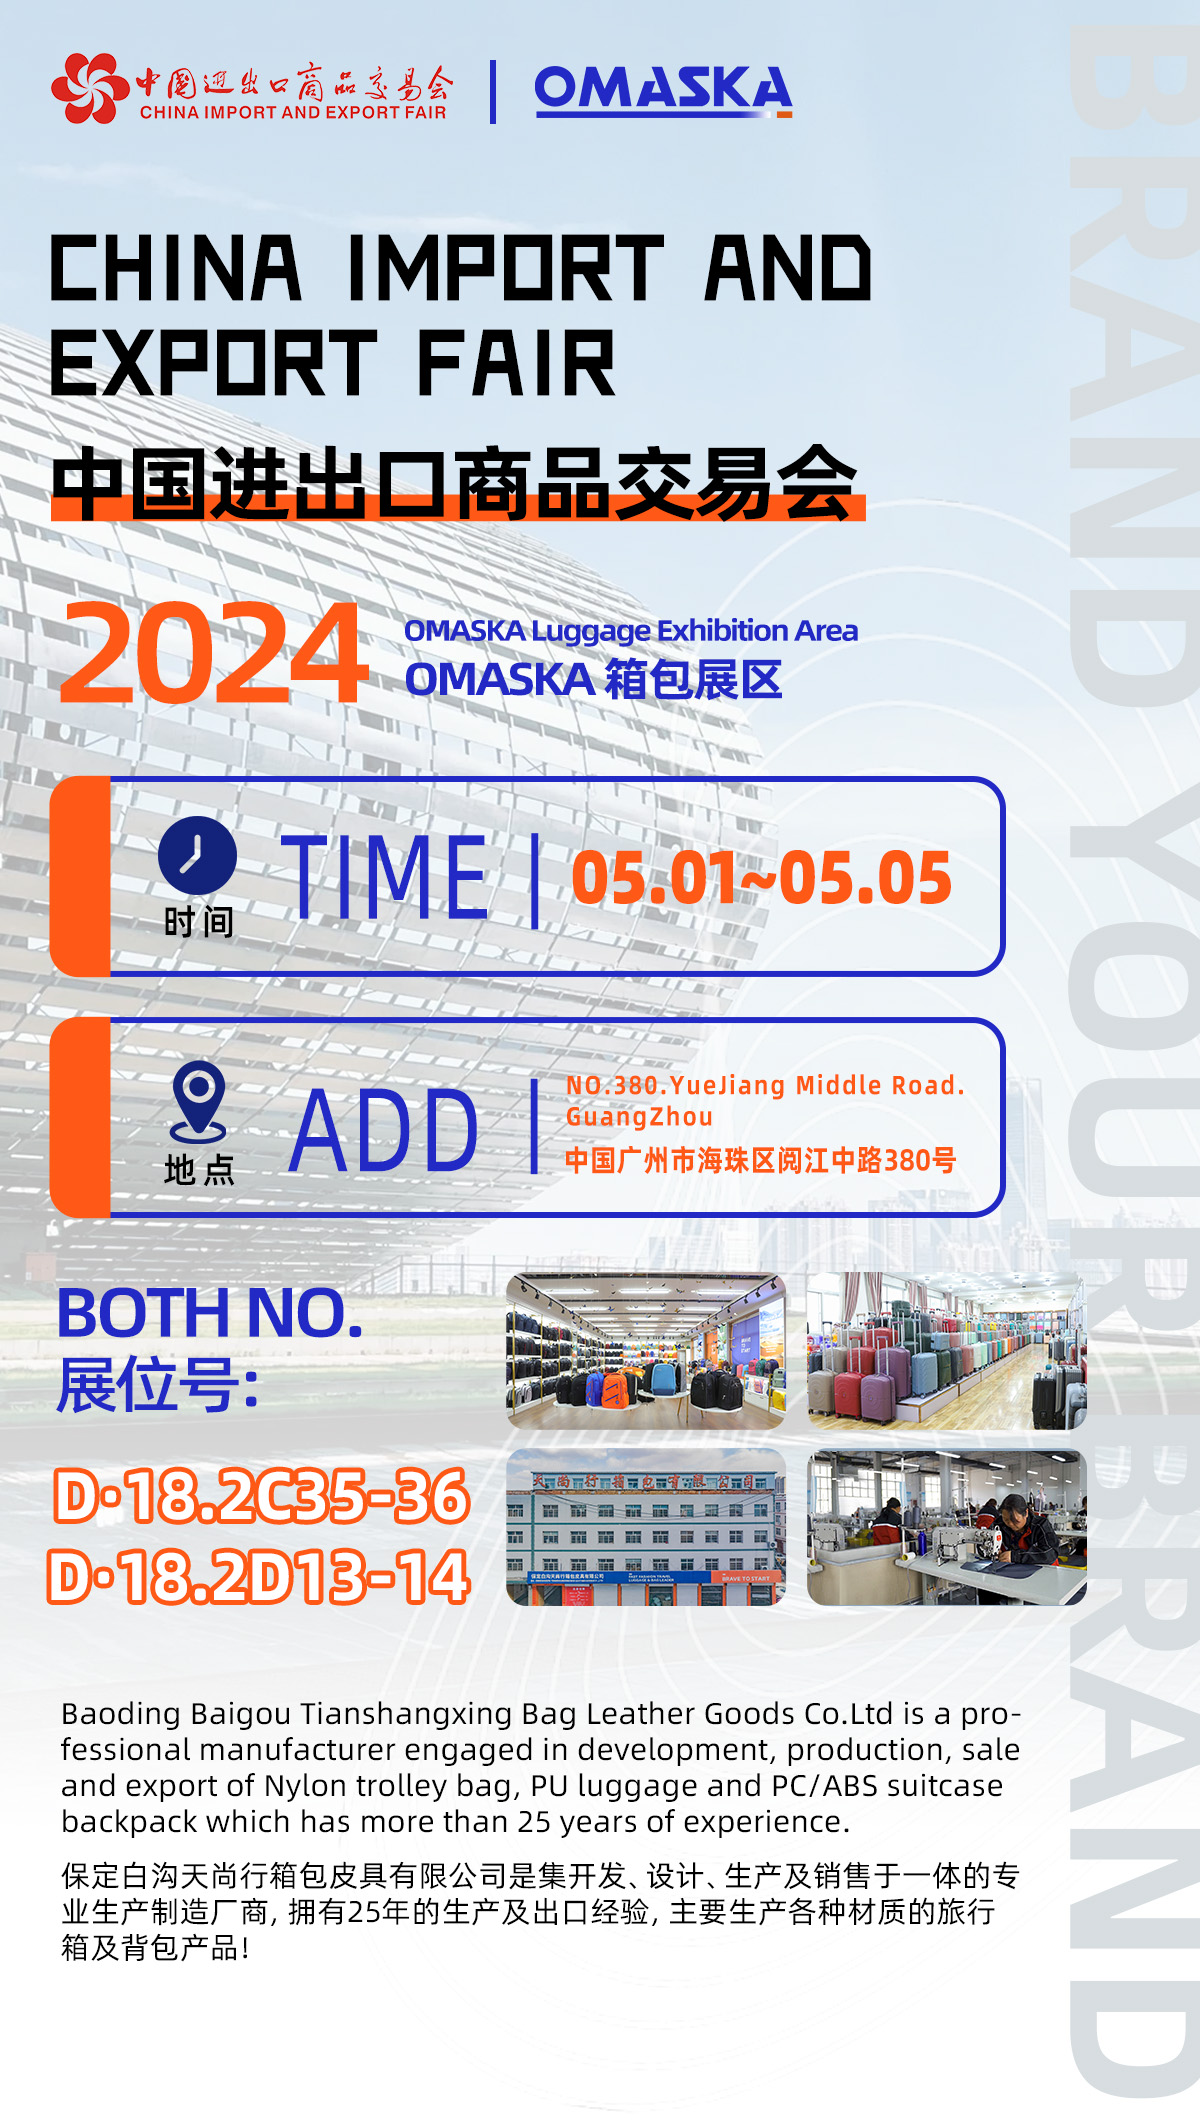 You’re Invited to Experience Innovation at the Canton Fair with OMASKA Luggage!